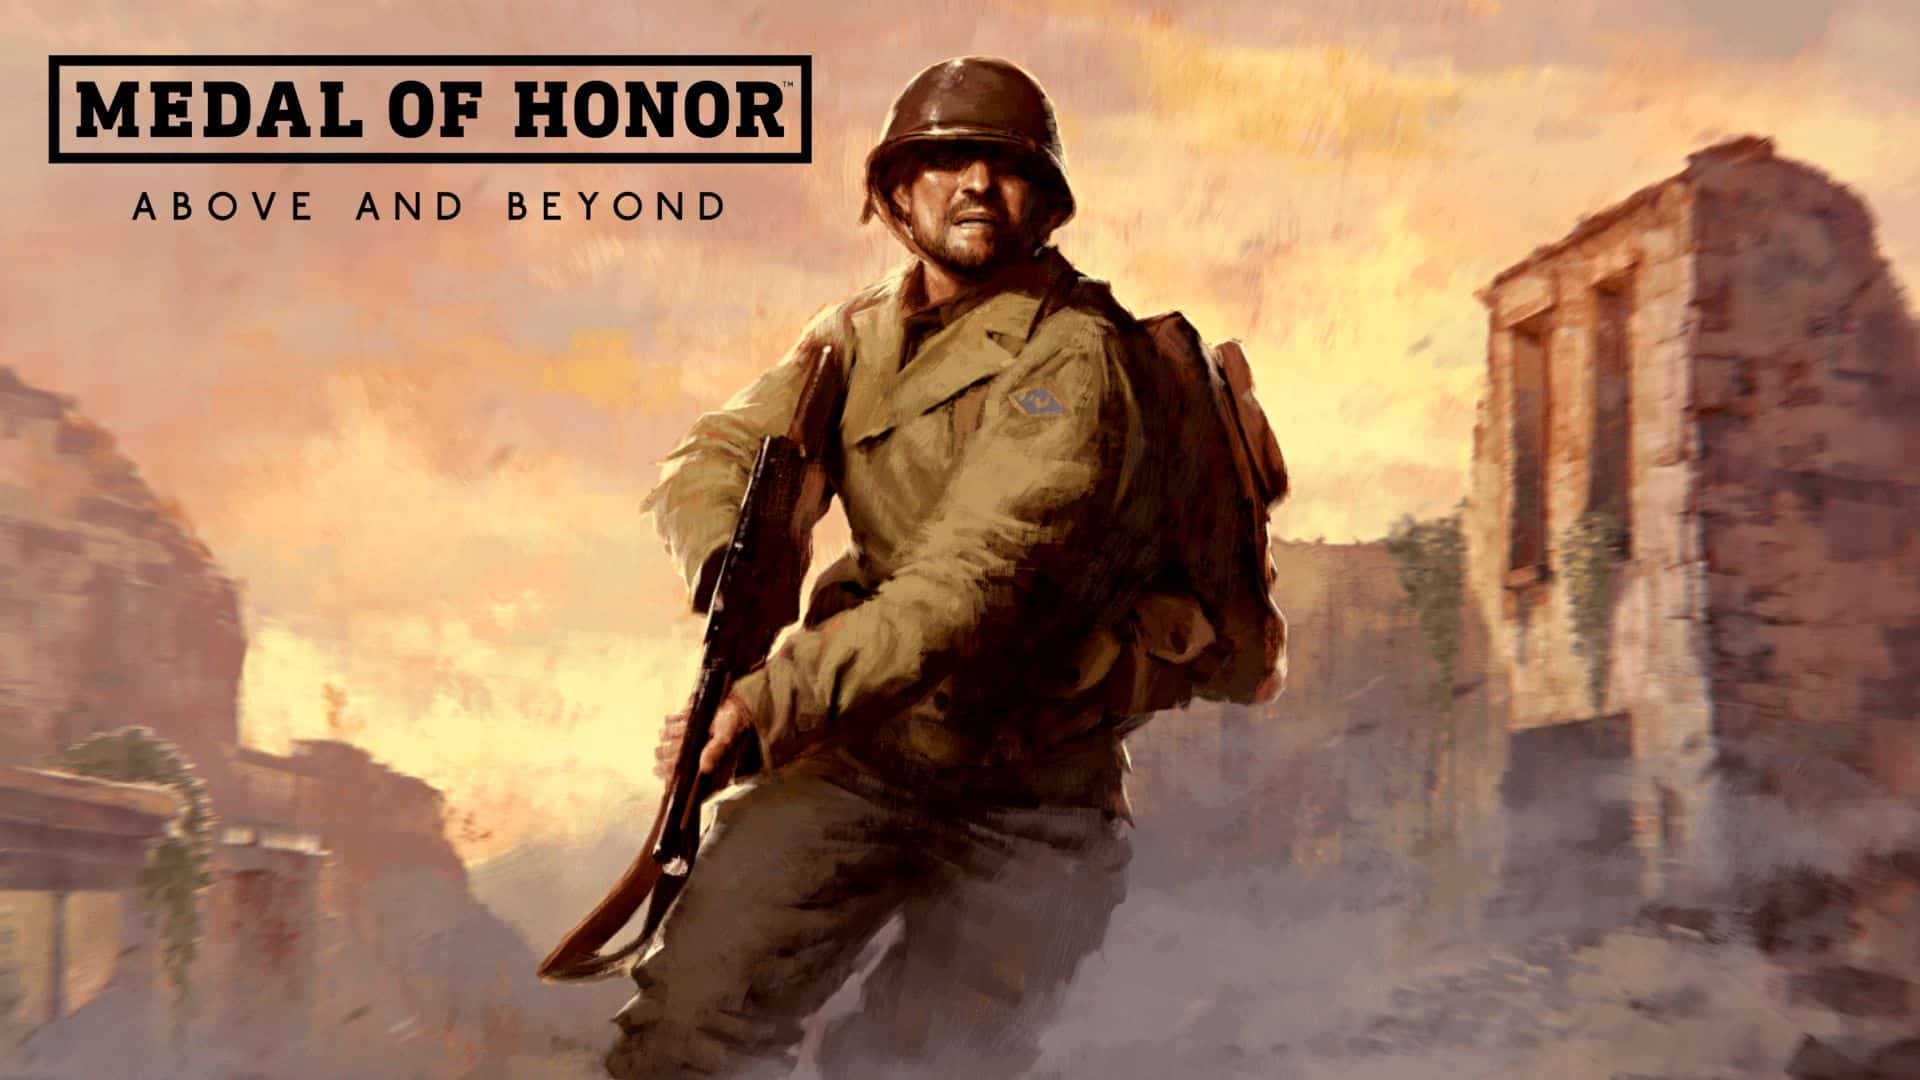 medal of honor above and beyond